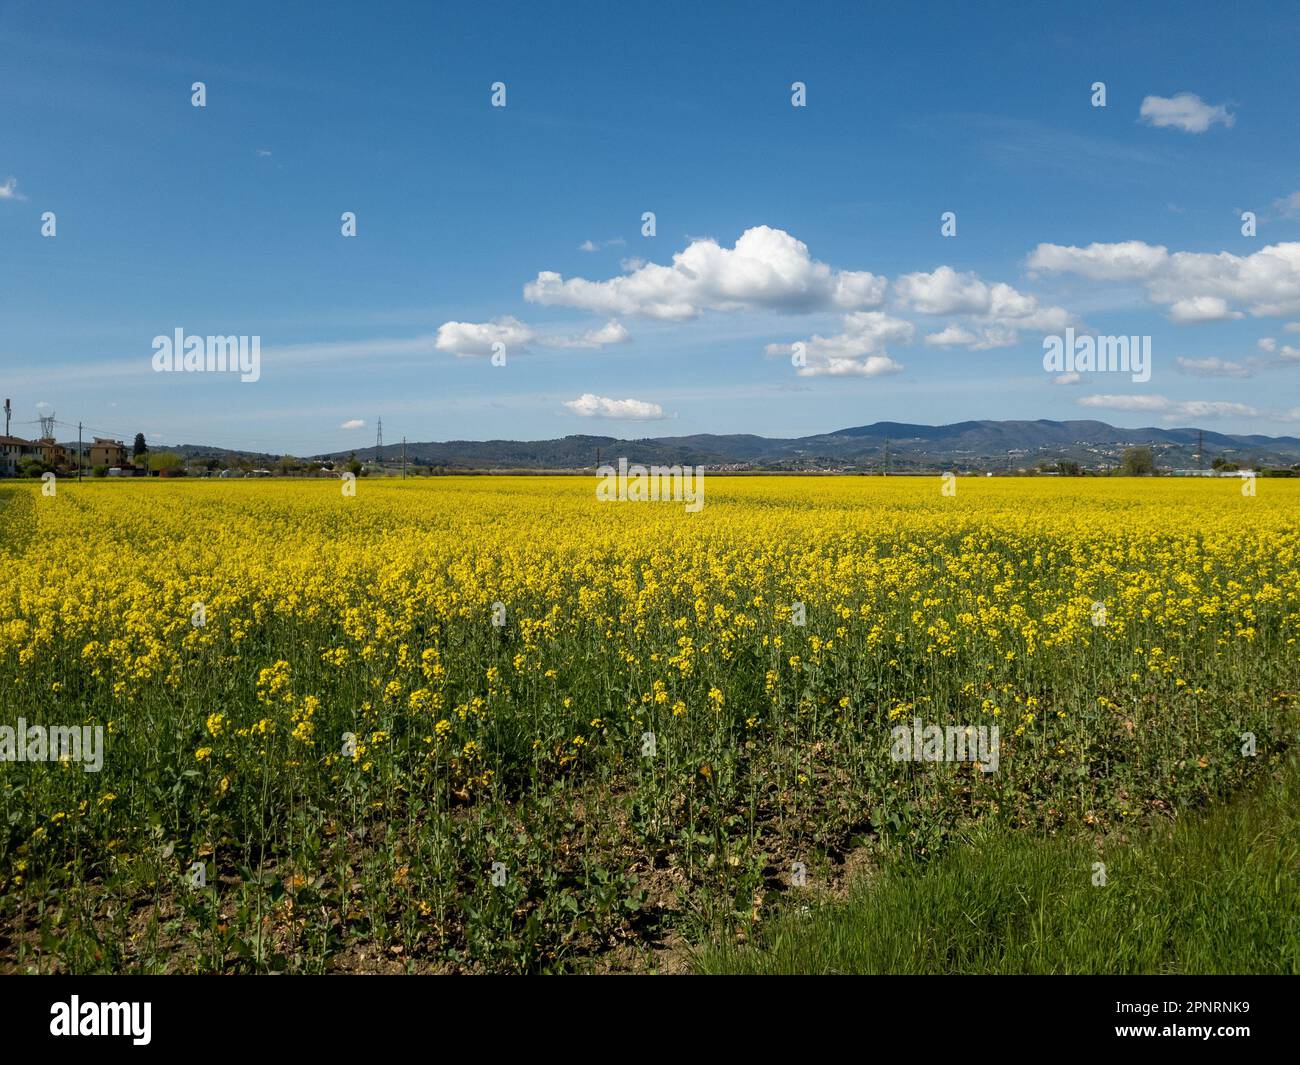 Rural landscape with flowering rapeseed fields Stock Photo